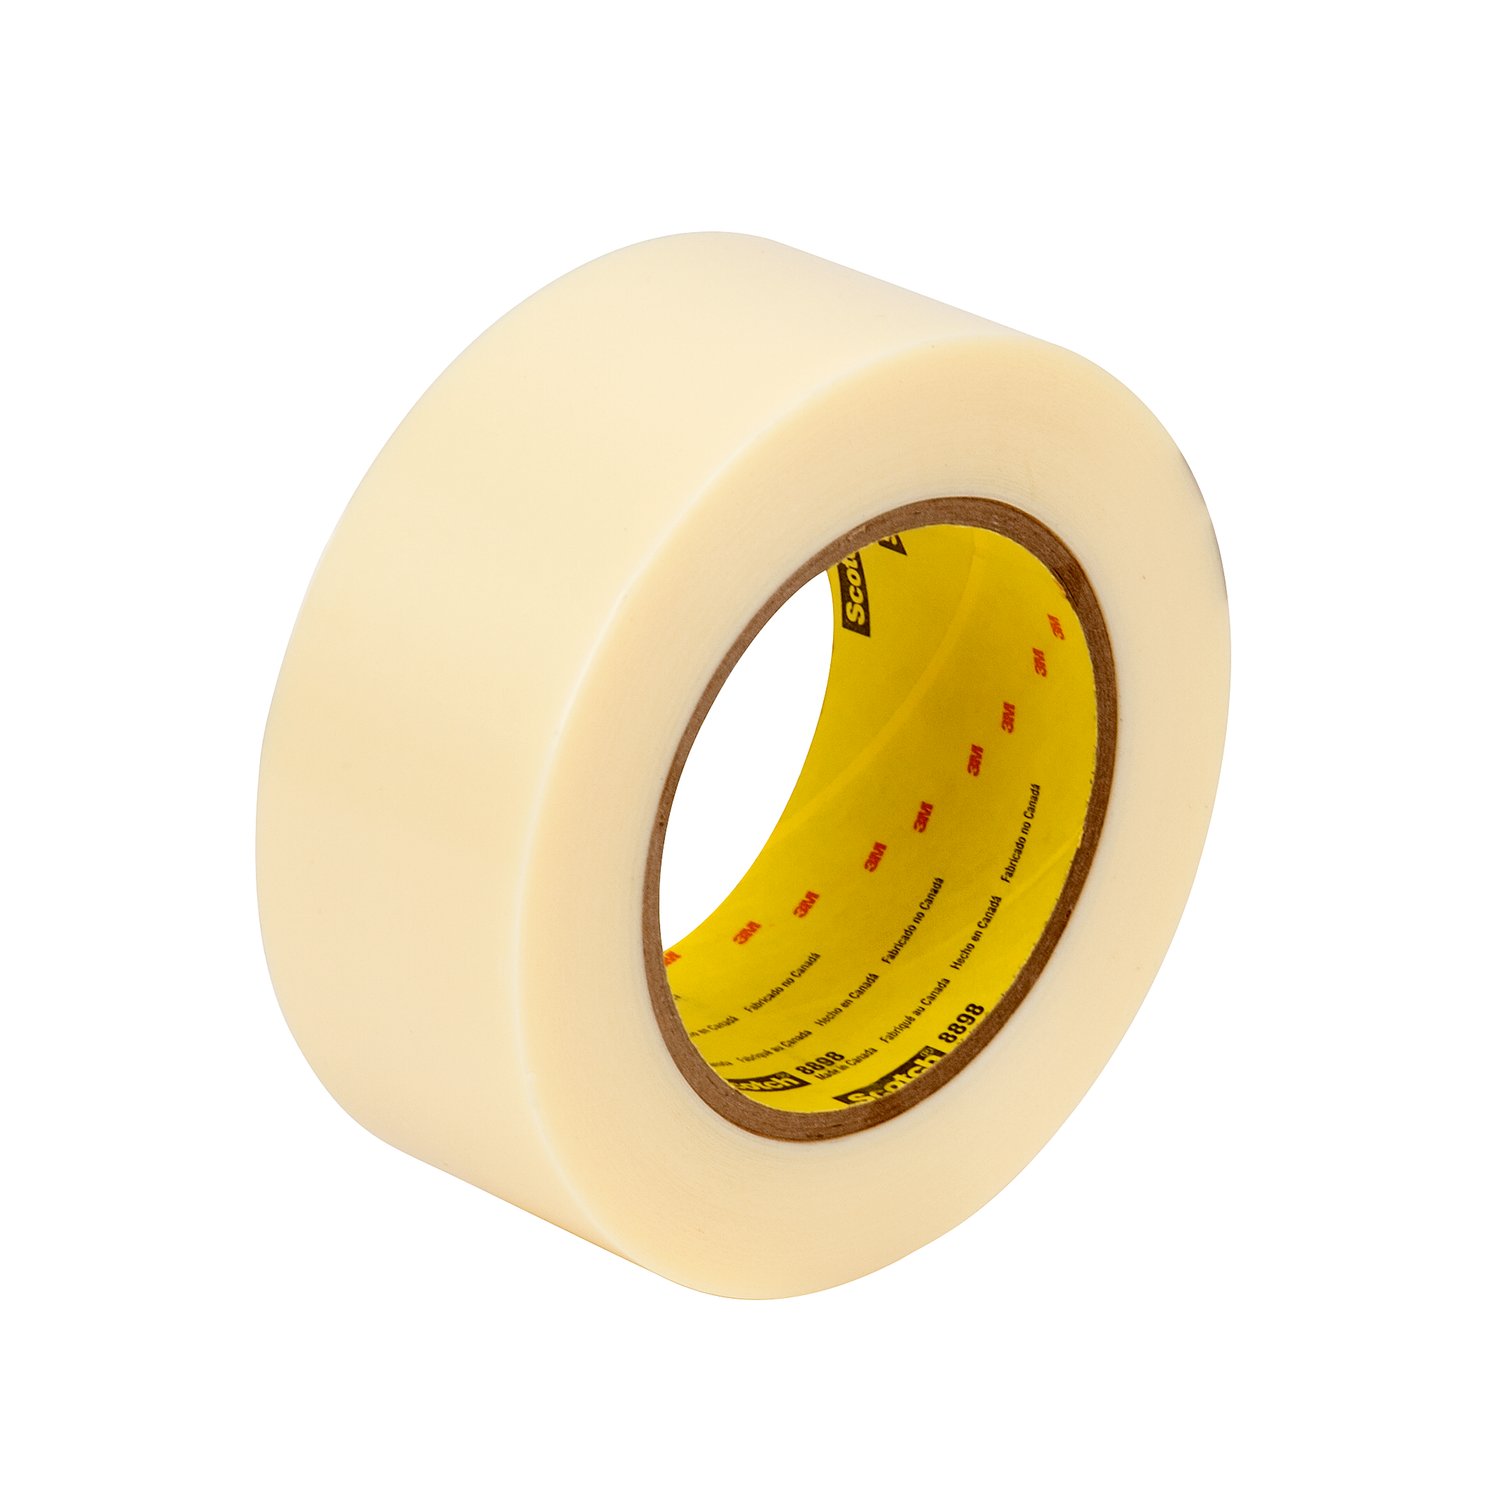 7000048928 - Scotch Strapping Tape 8898, Ivory, 48 mm x 55 m, 4.6 mil, 24 rolls case